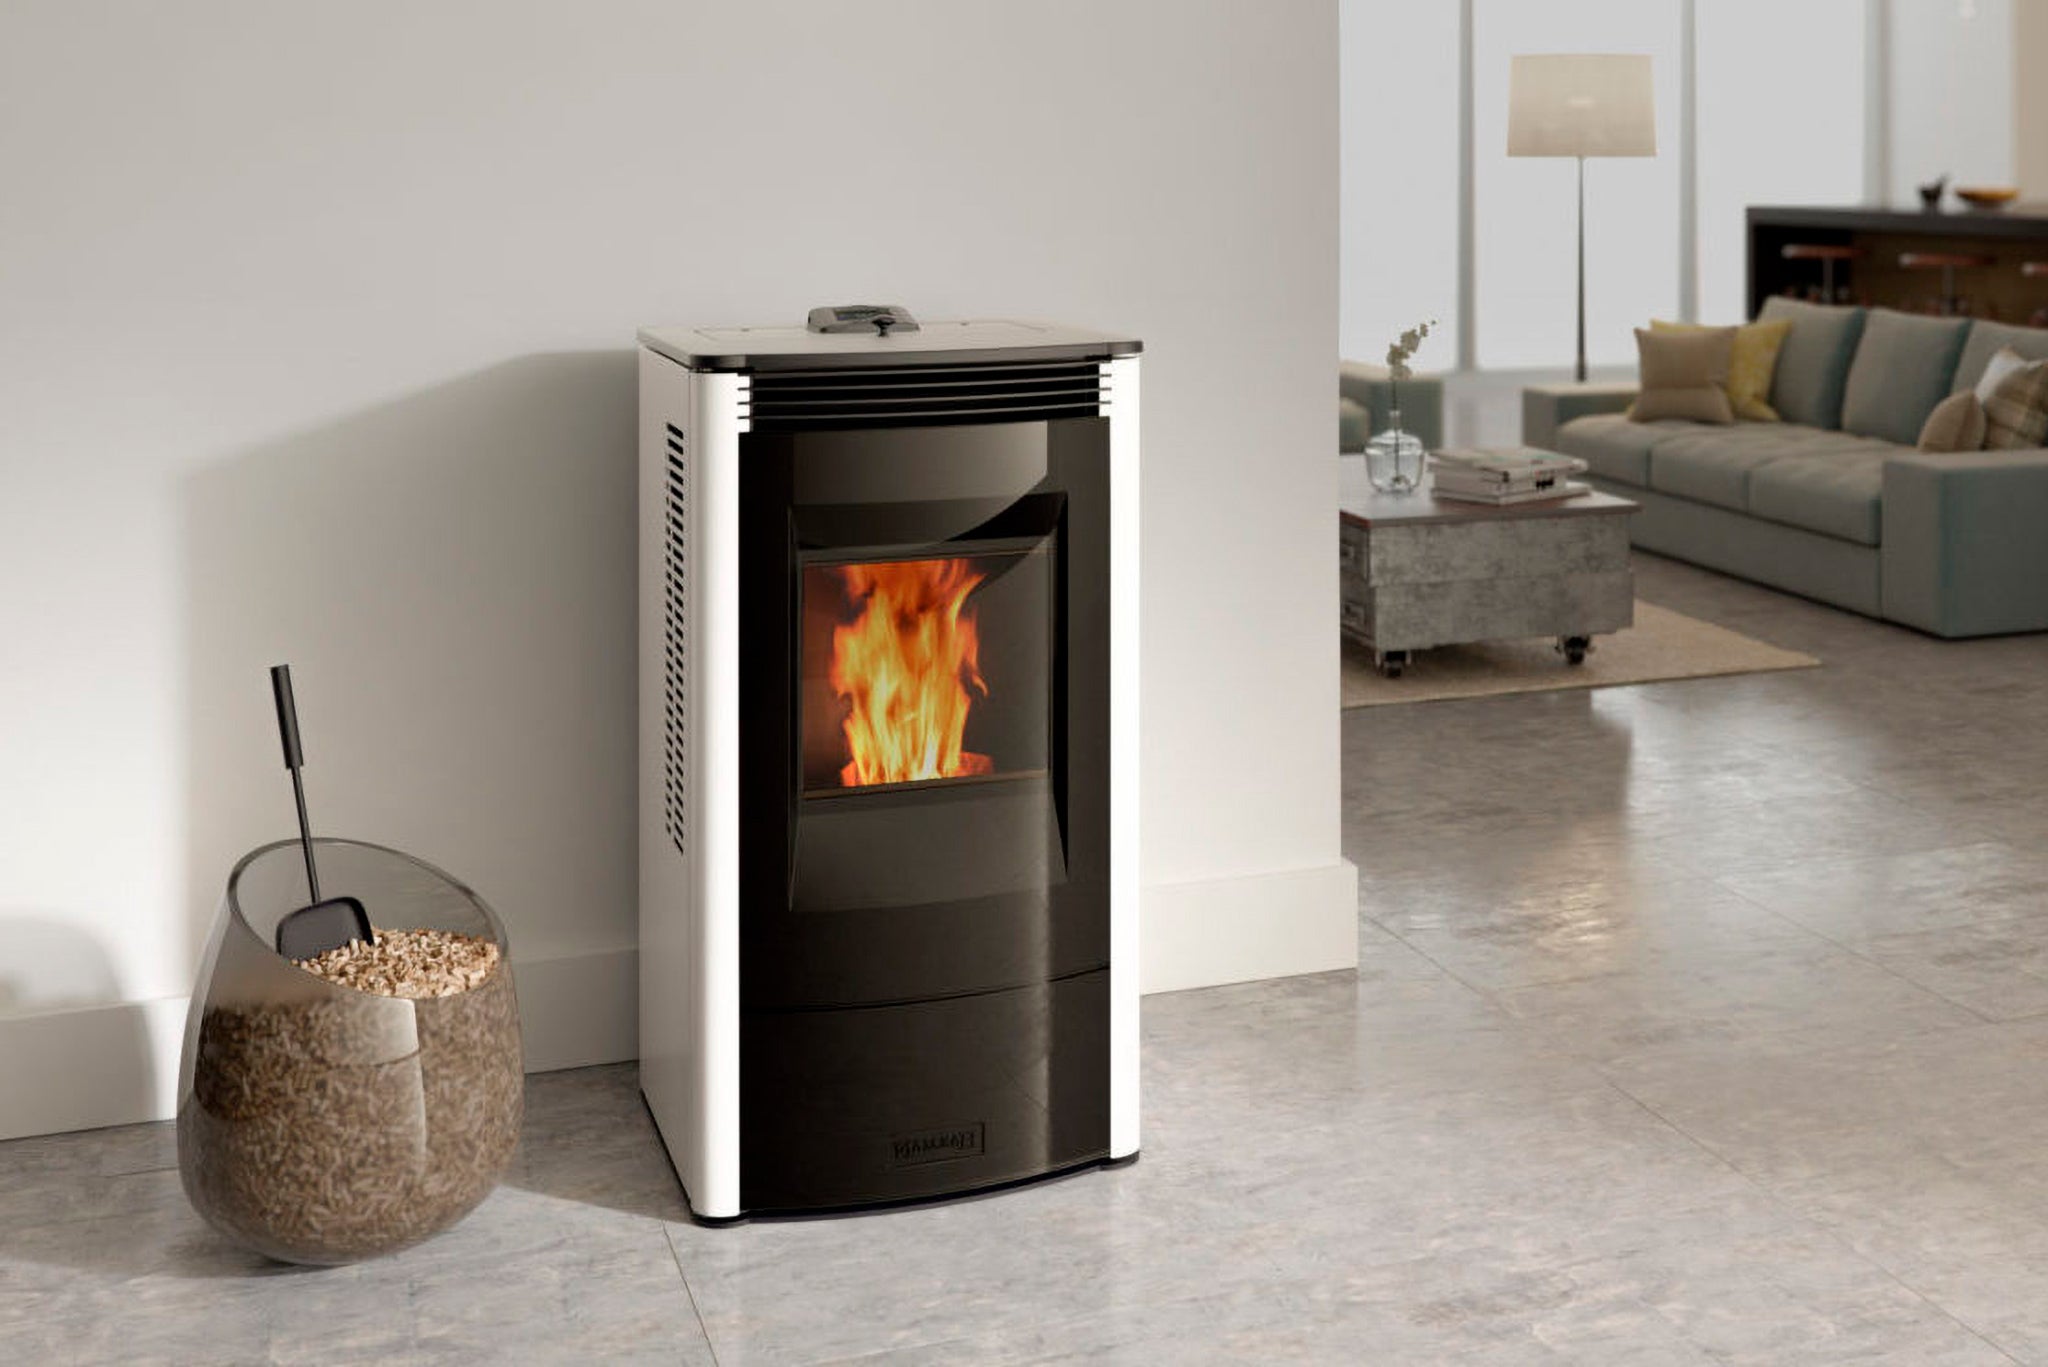 Pellet Stoves vs. Wood Stoves: Which Is Right for Your Home